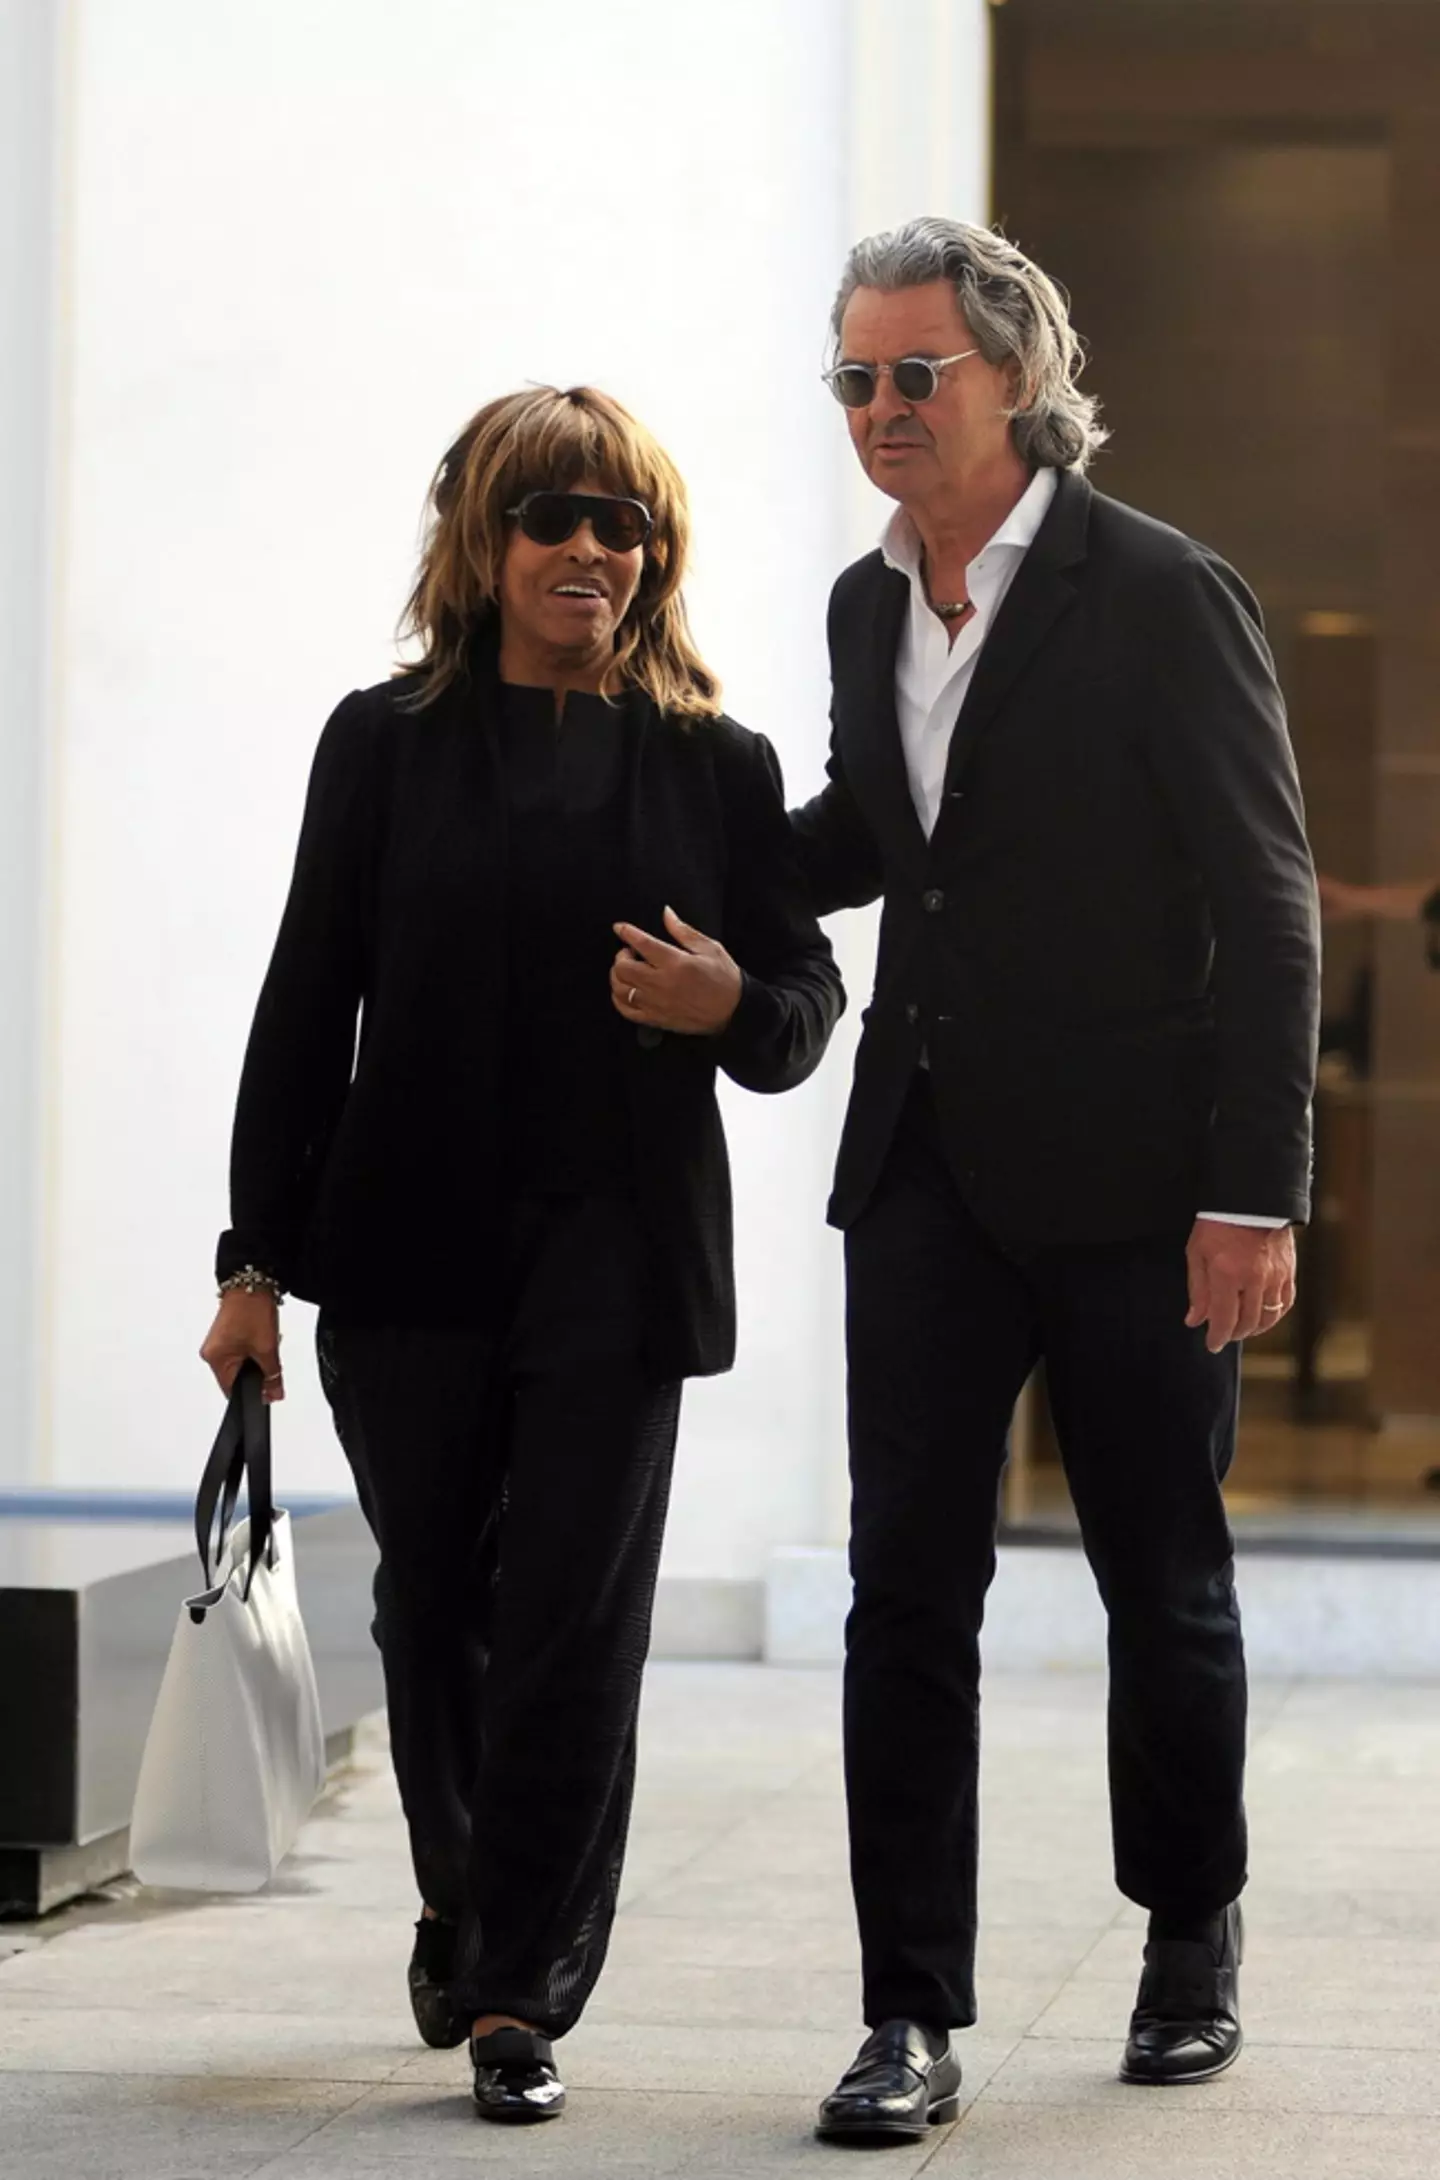 Tina Turner's husband stepped in to save he life.